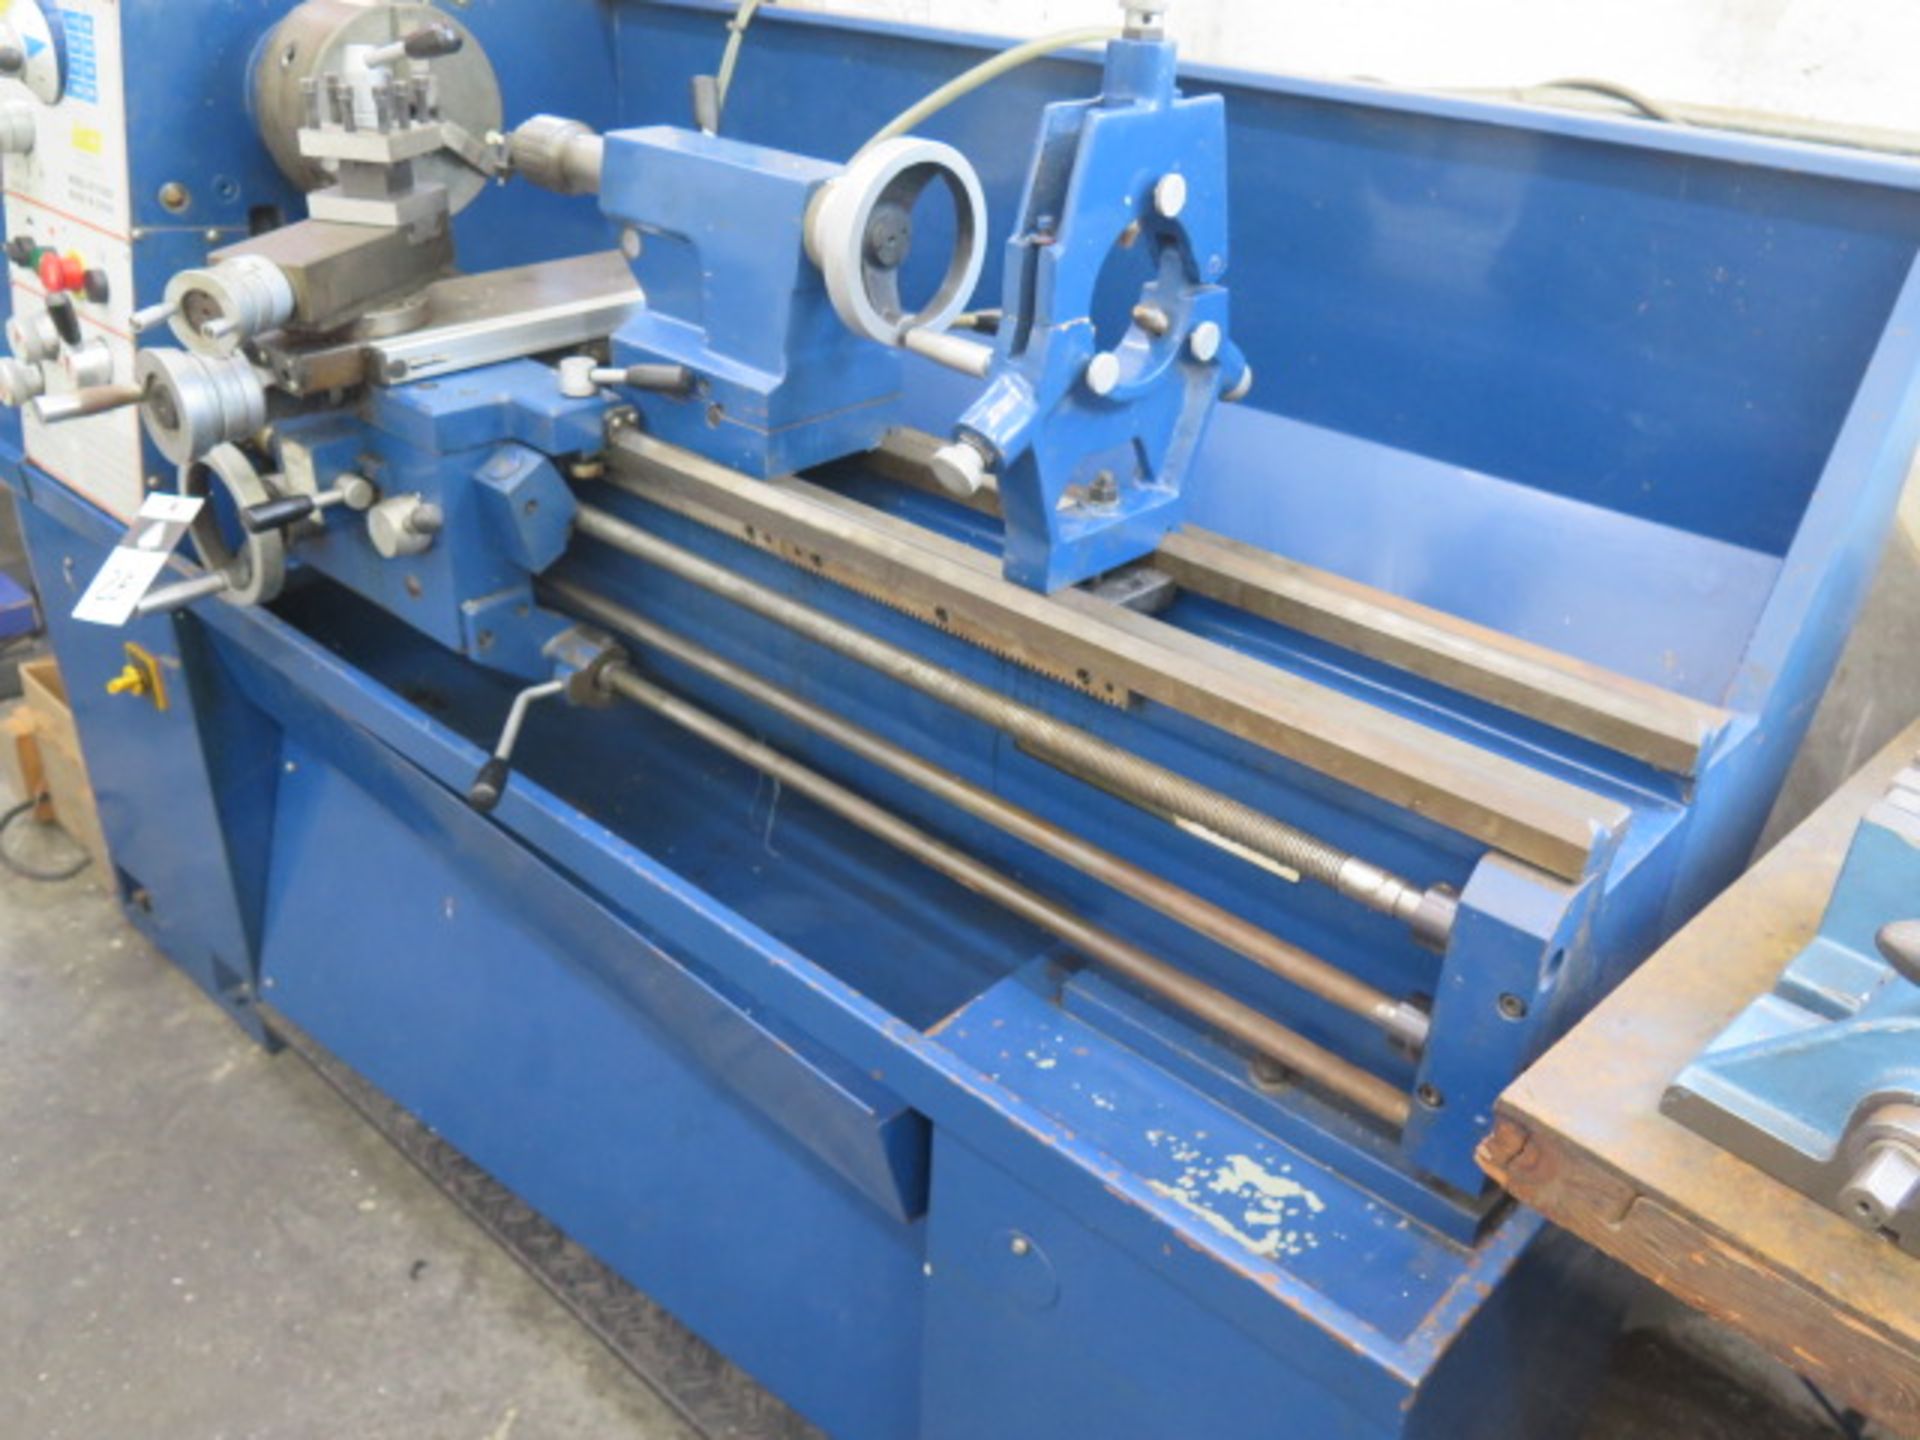 Enco mdl. 111-332 14” x 42” Gap Bed Lathe s/n 022647 w/ Acu-Rite DRO, 46-1800 RPM, SOLD AS IS - Image 2 of 15